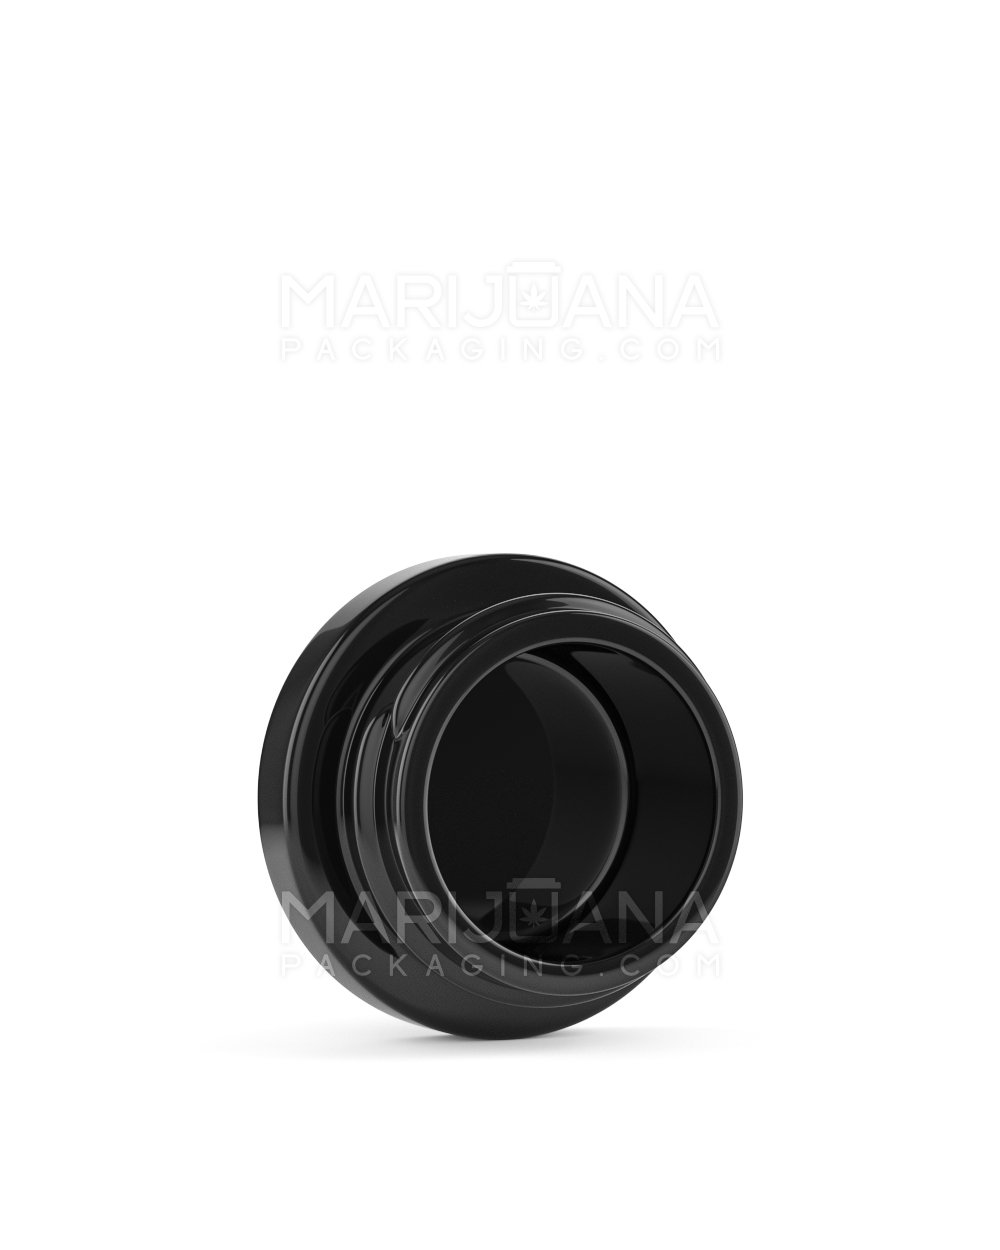 Glossy Black Glass Concentrate Containers | 38mm - 9mL - 320 Count - 3